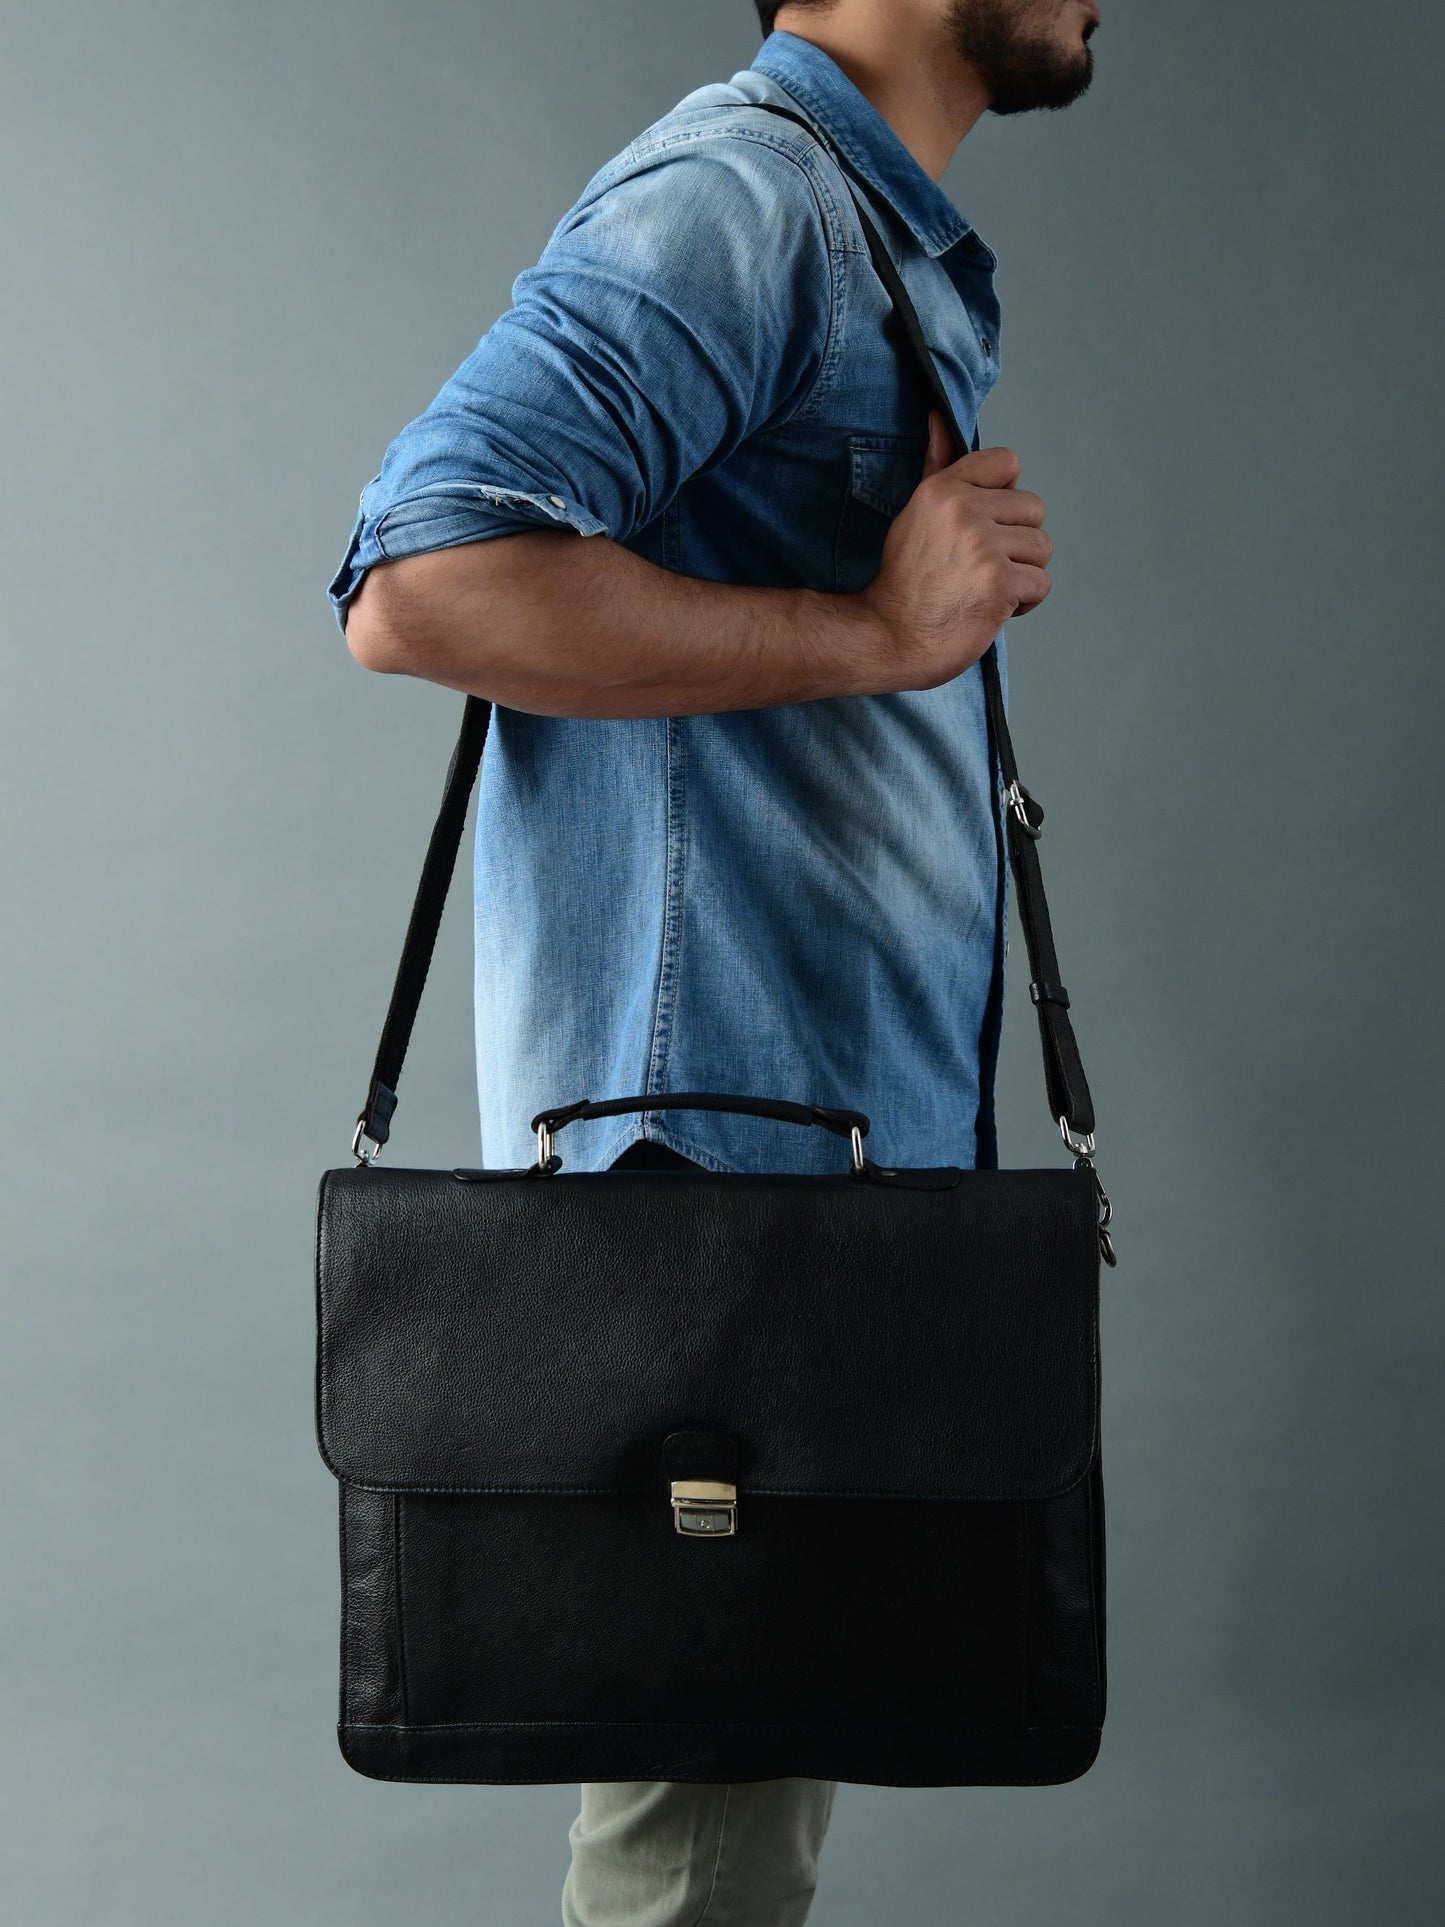 Business Attache Laptop Bag - Italian Finish - The Tool Store